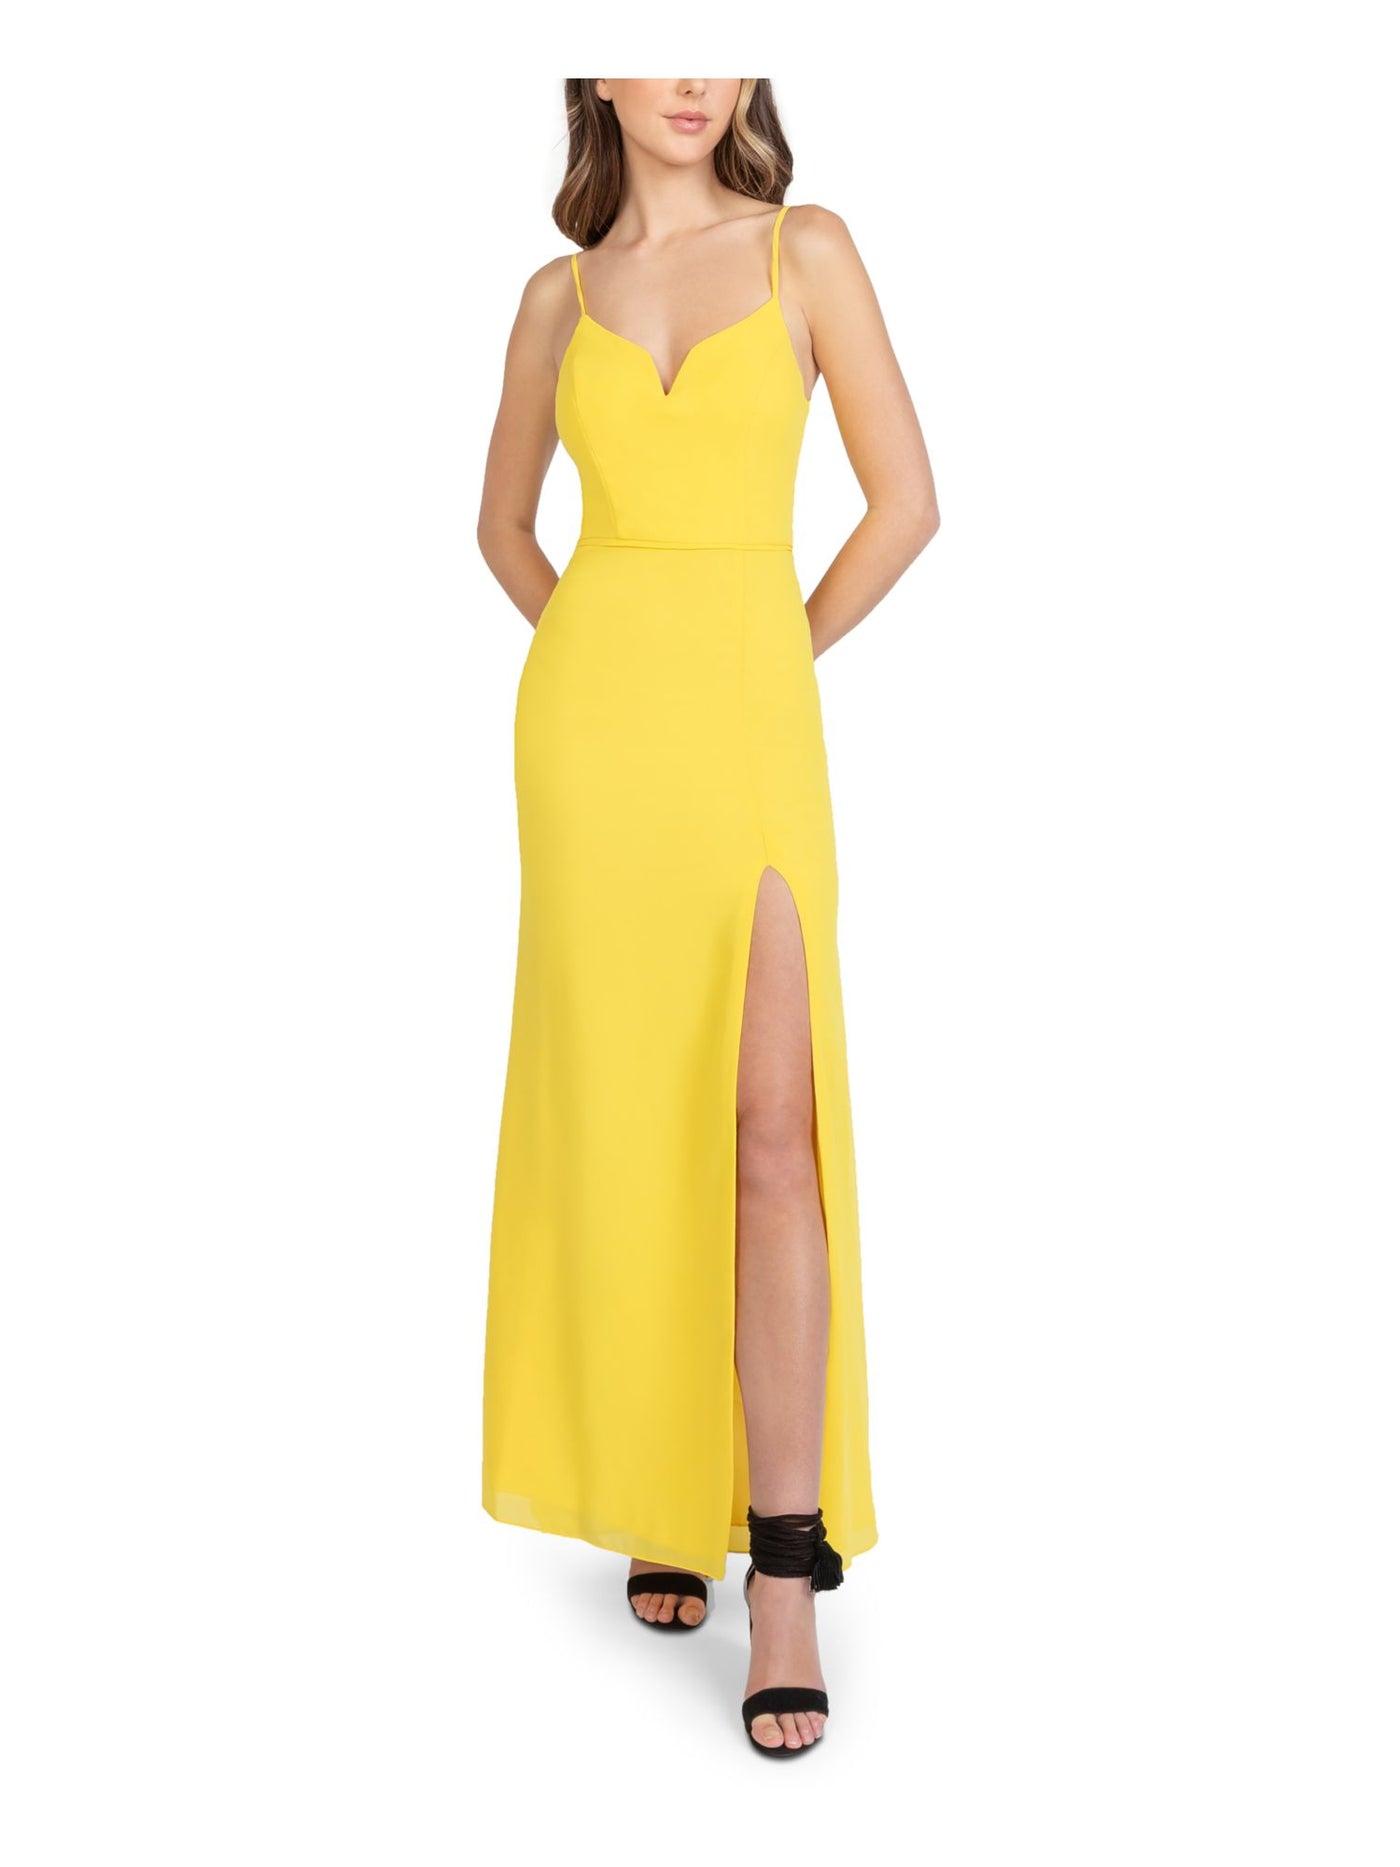 B DARLIN Womens Yellow Zippered Slitted Adjustable Straps Lined Sleeveless Sweetheart Neckline Full-Length  Gown Prom Dress Juniors 5\6